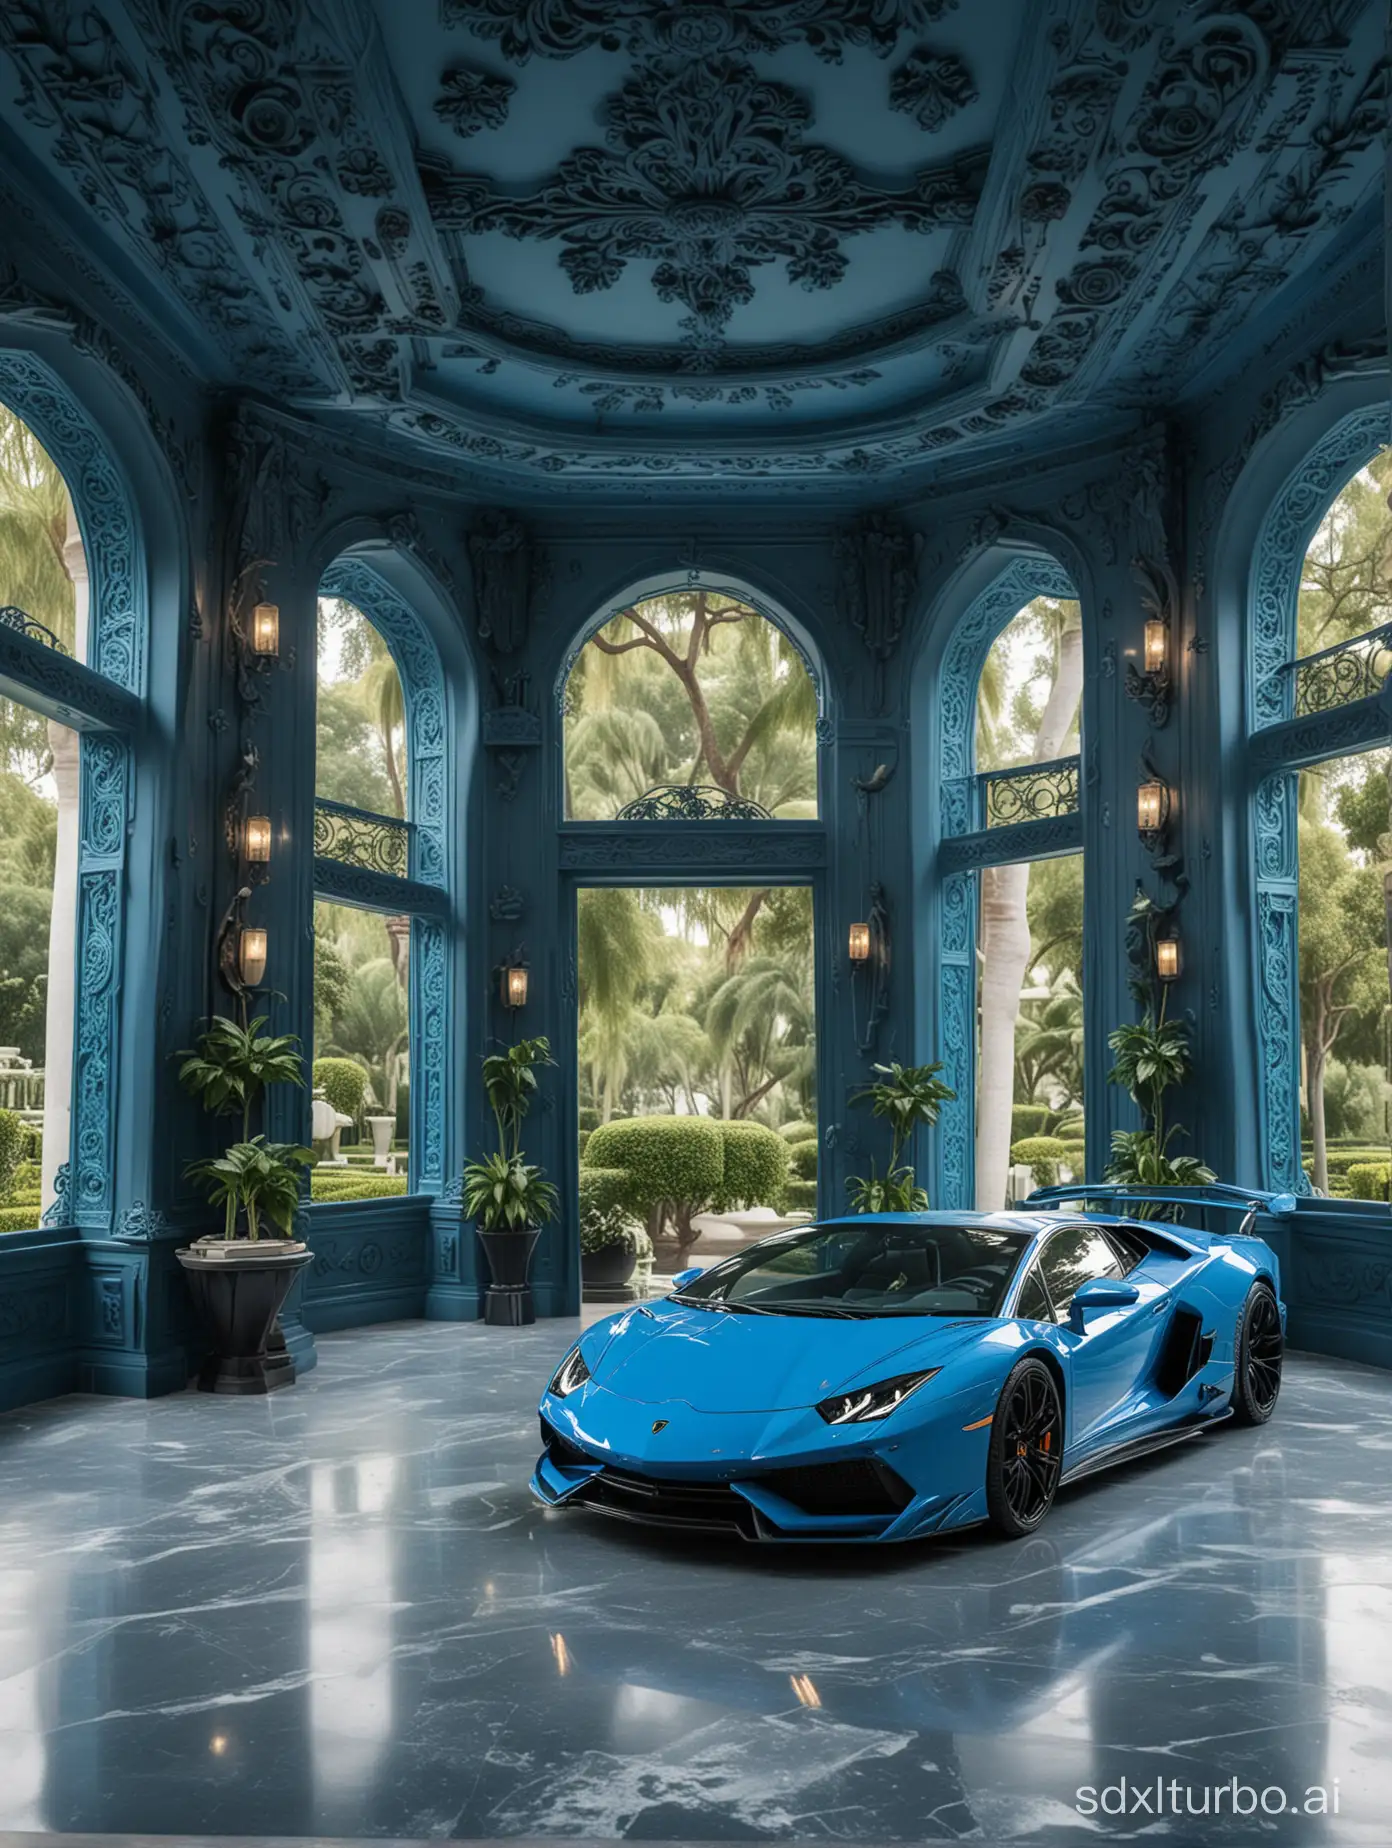 An extravagant showroom with a Lamborghini car in blue color, with intricate carvings and intricate details, surrounded by lush landscape gardens, modern and luxurious mansion